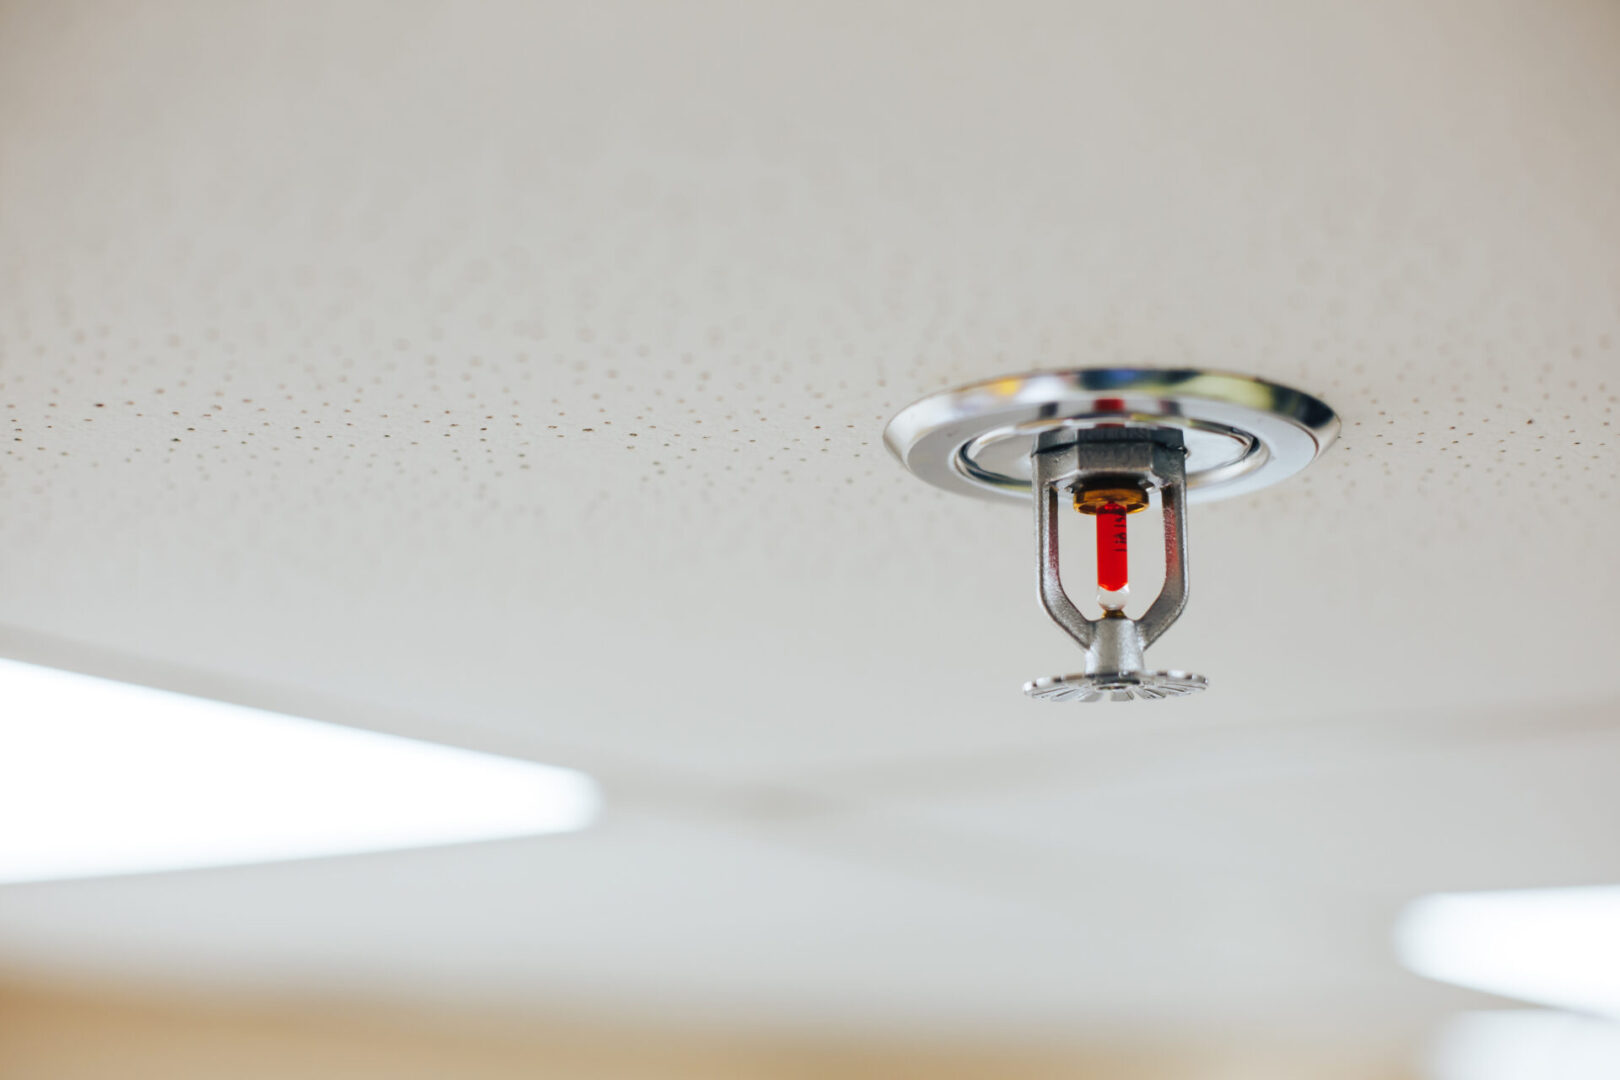 A fire sprinkler is shown in the ceiling.